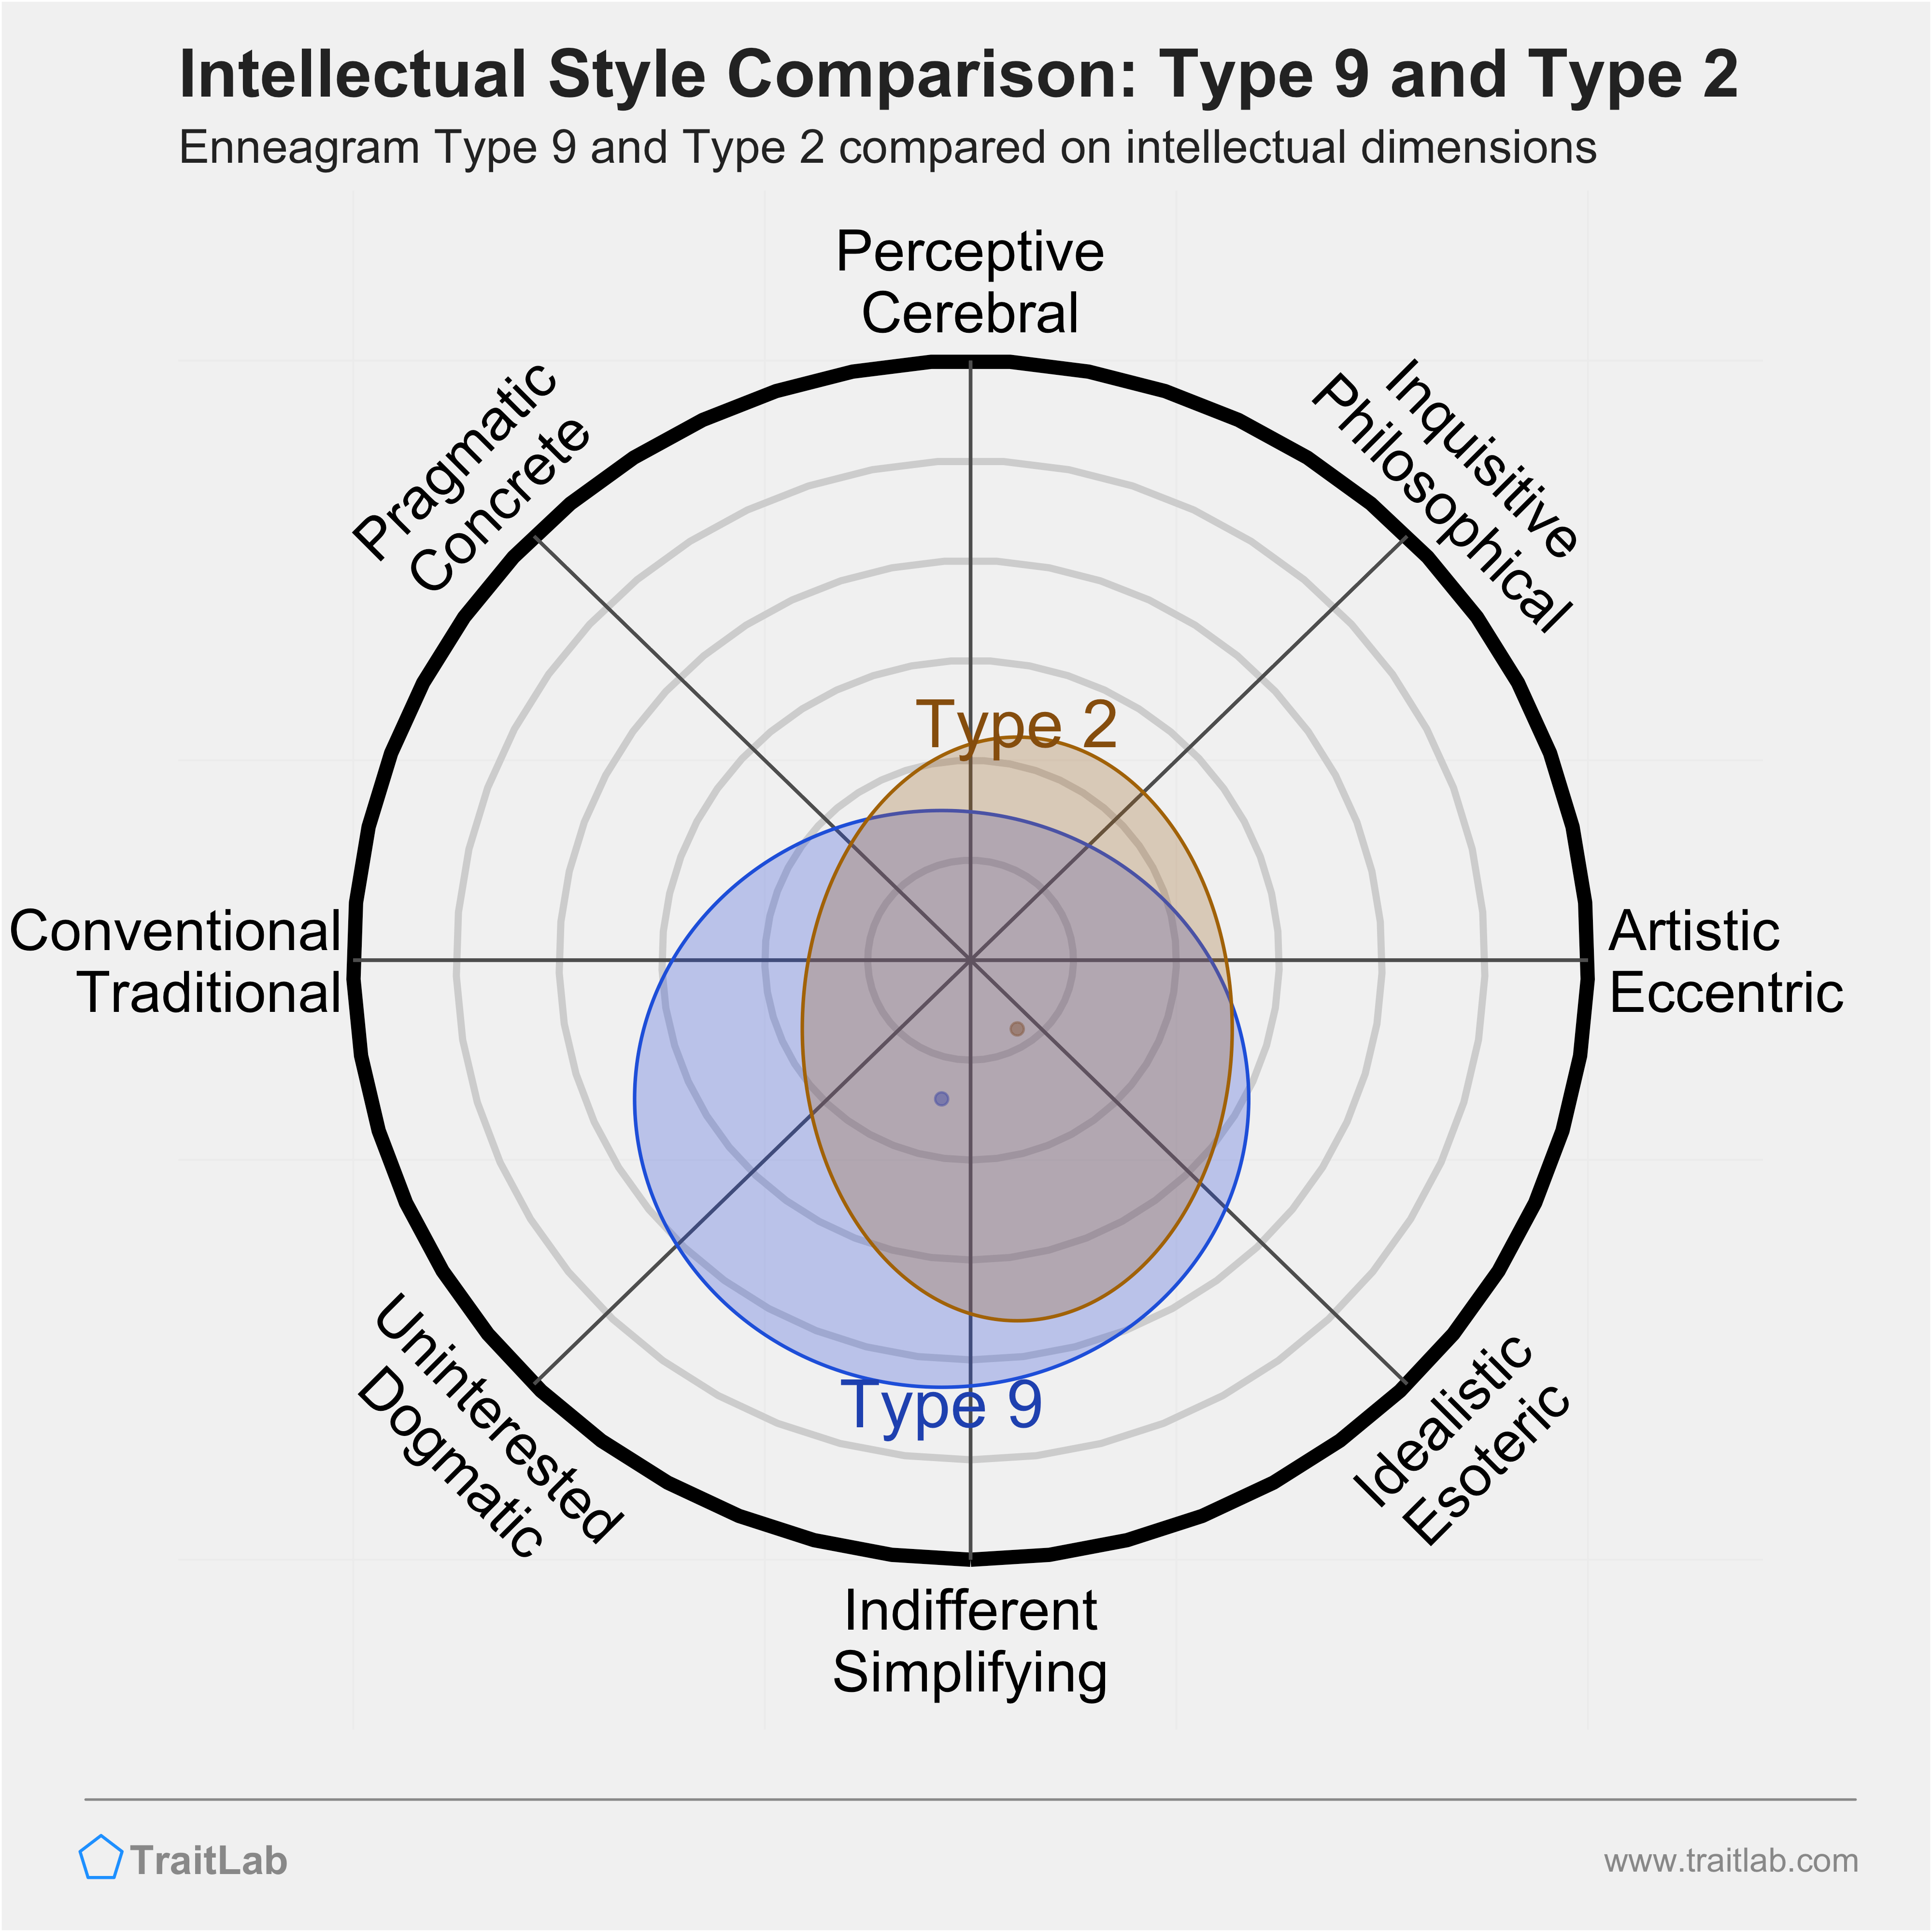 Type 9 and Type 2 comparison across intellectual dimensions